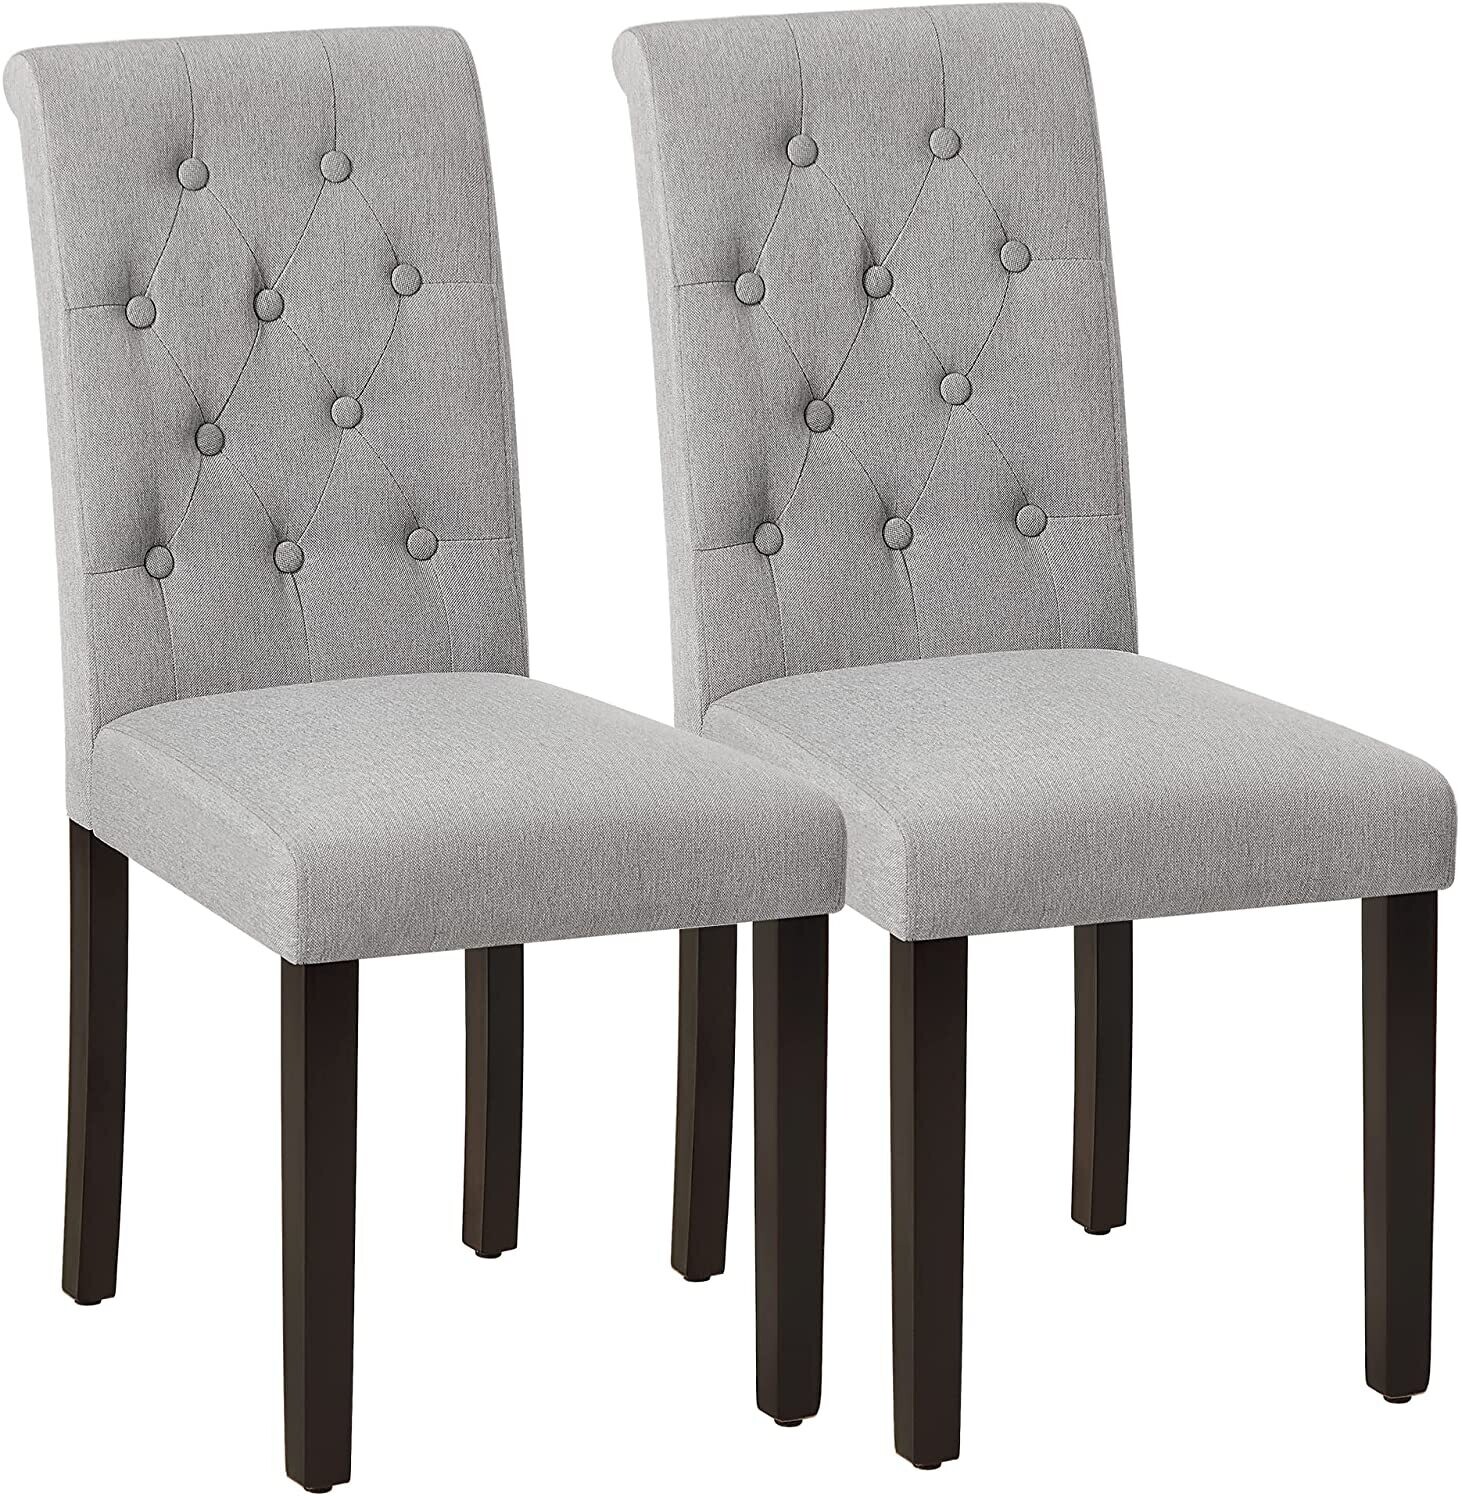 Set of 2 Dining Chairs, Kitchen Chairs